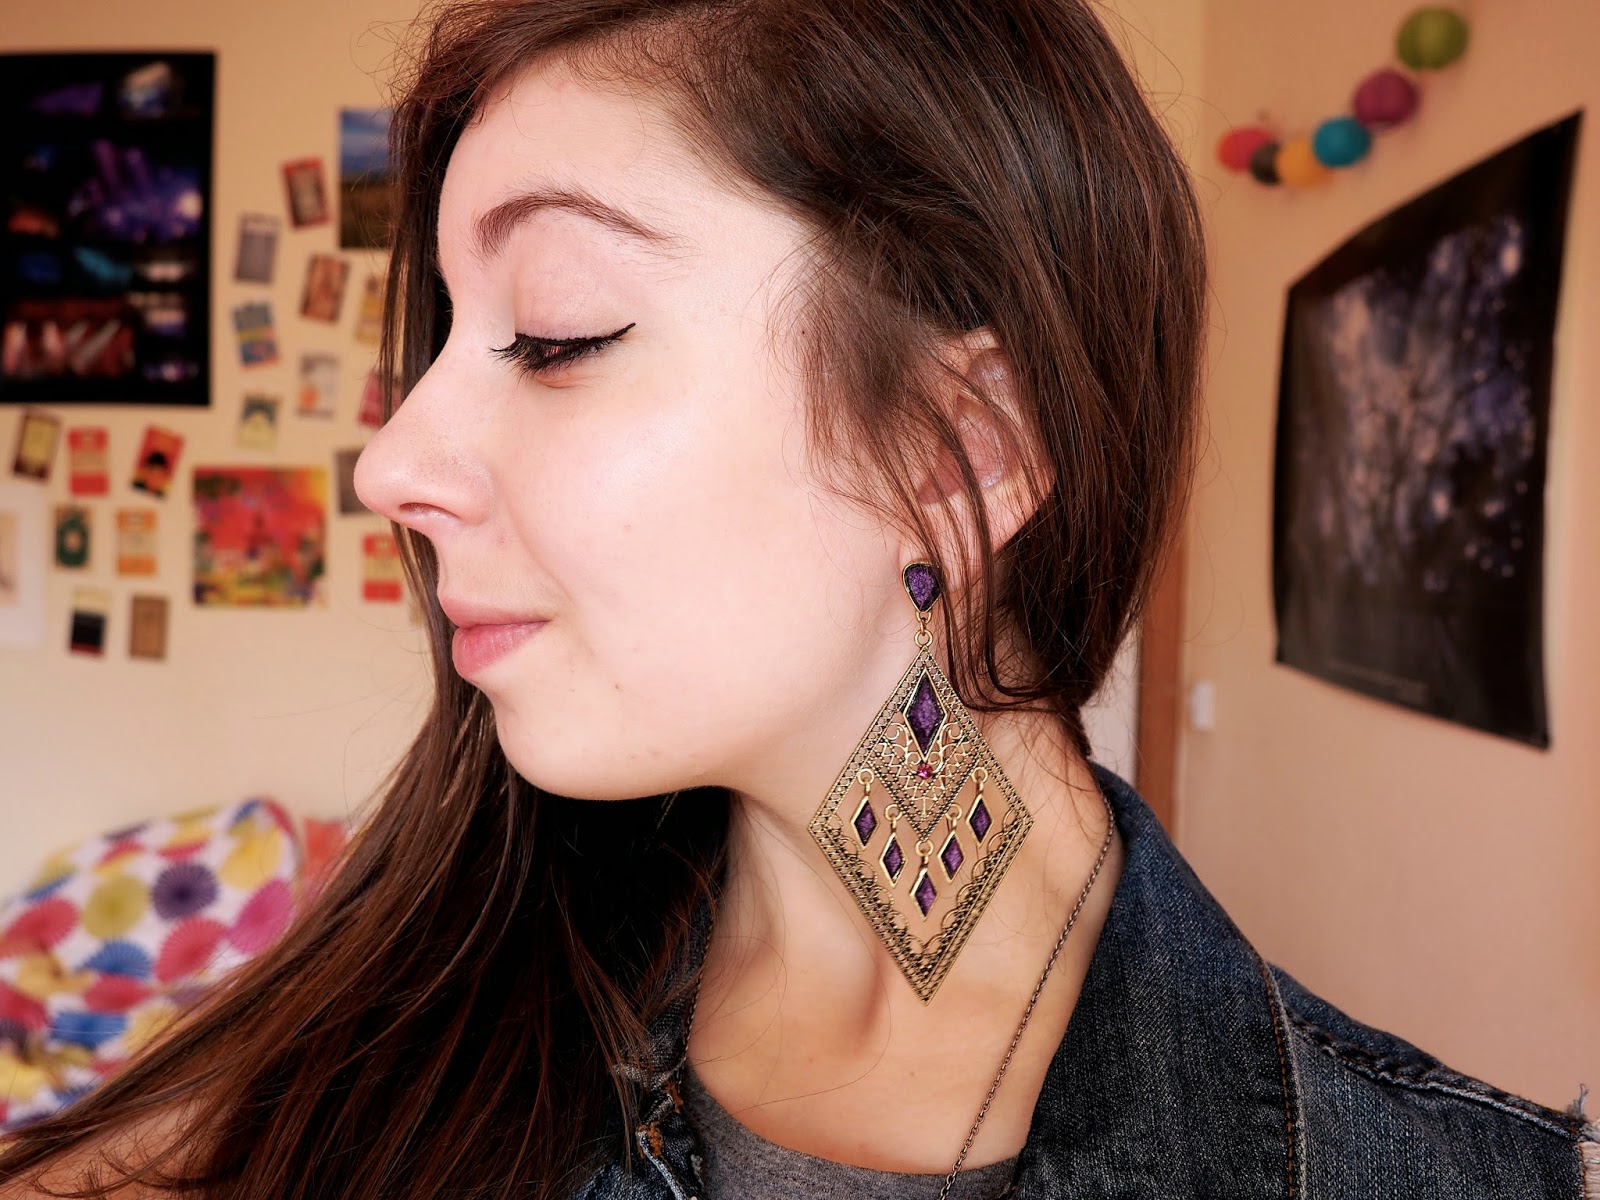 Distressed Denim outfit jewellery details | large purple and gold geometric diamond earrings from Dubai